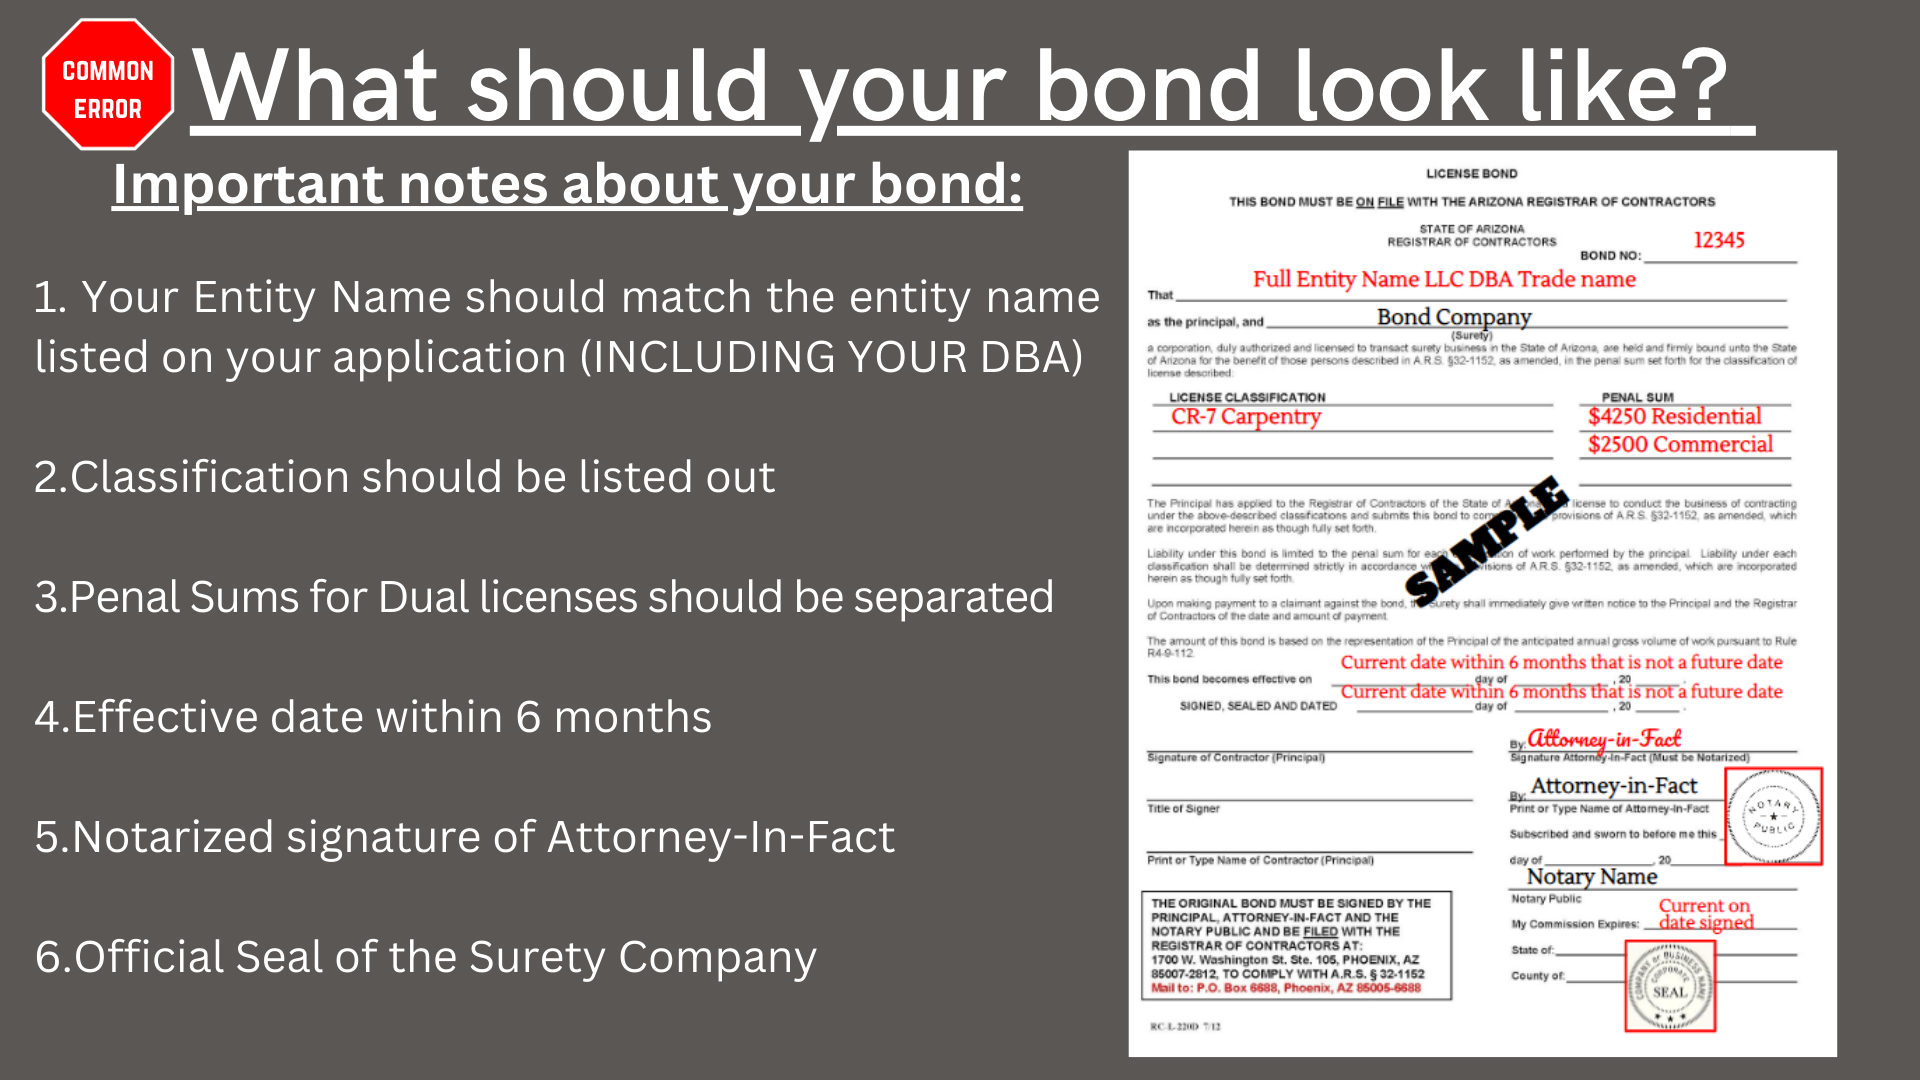 What should your bond look like?